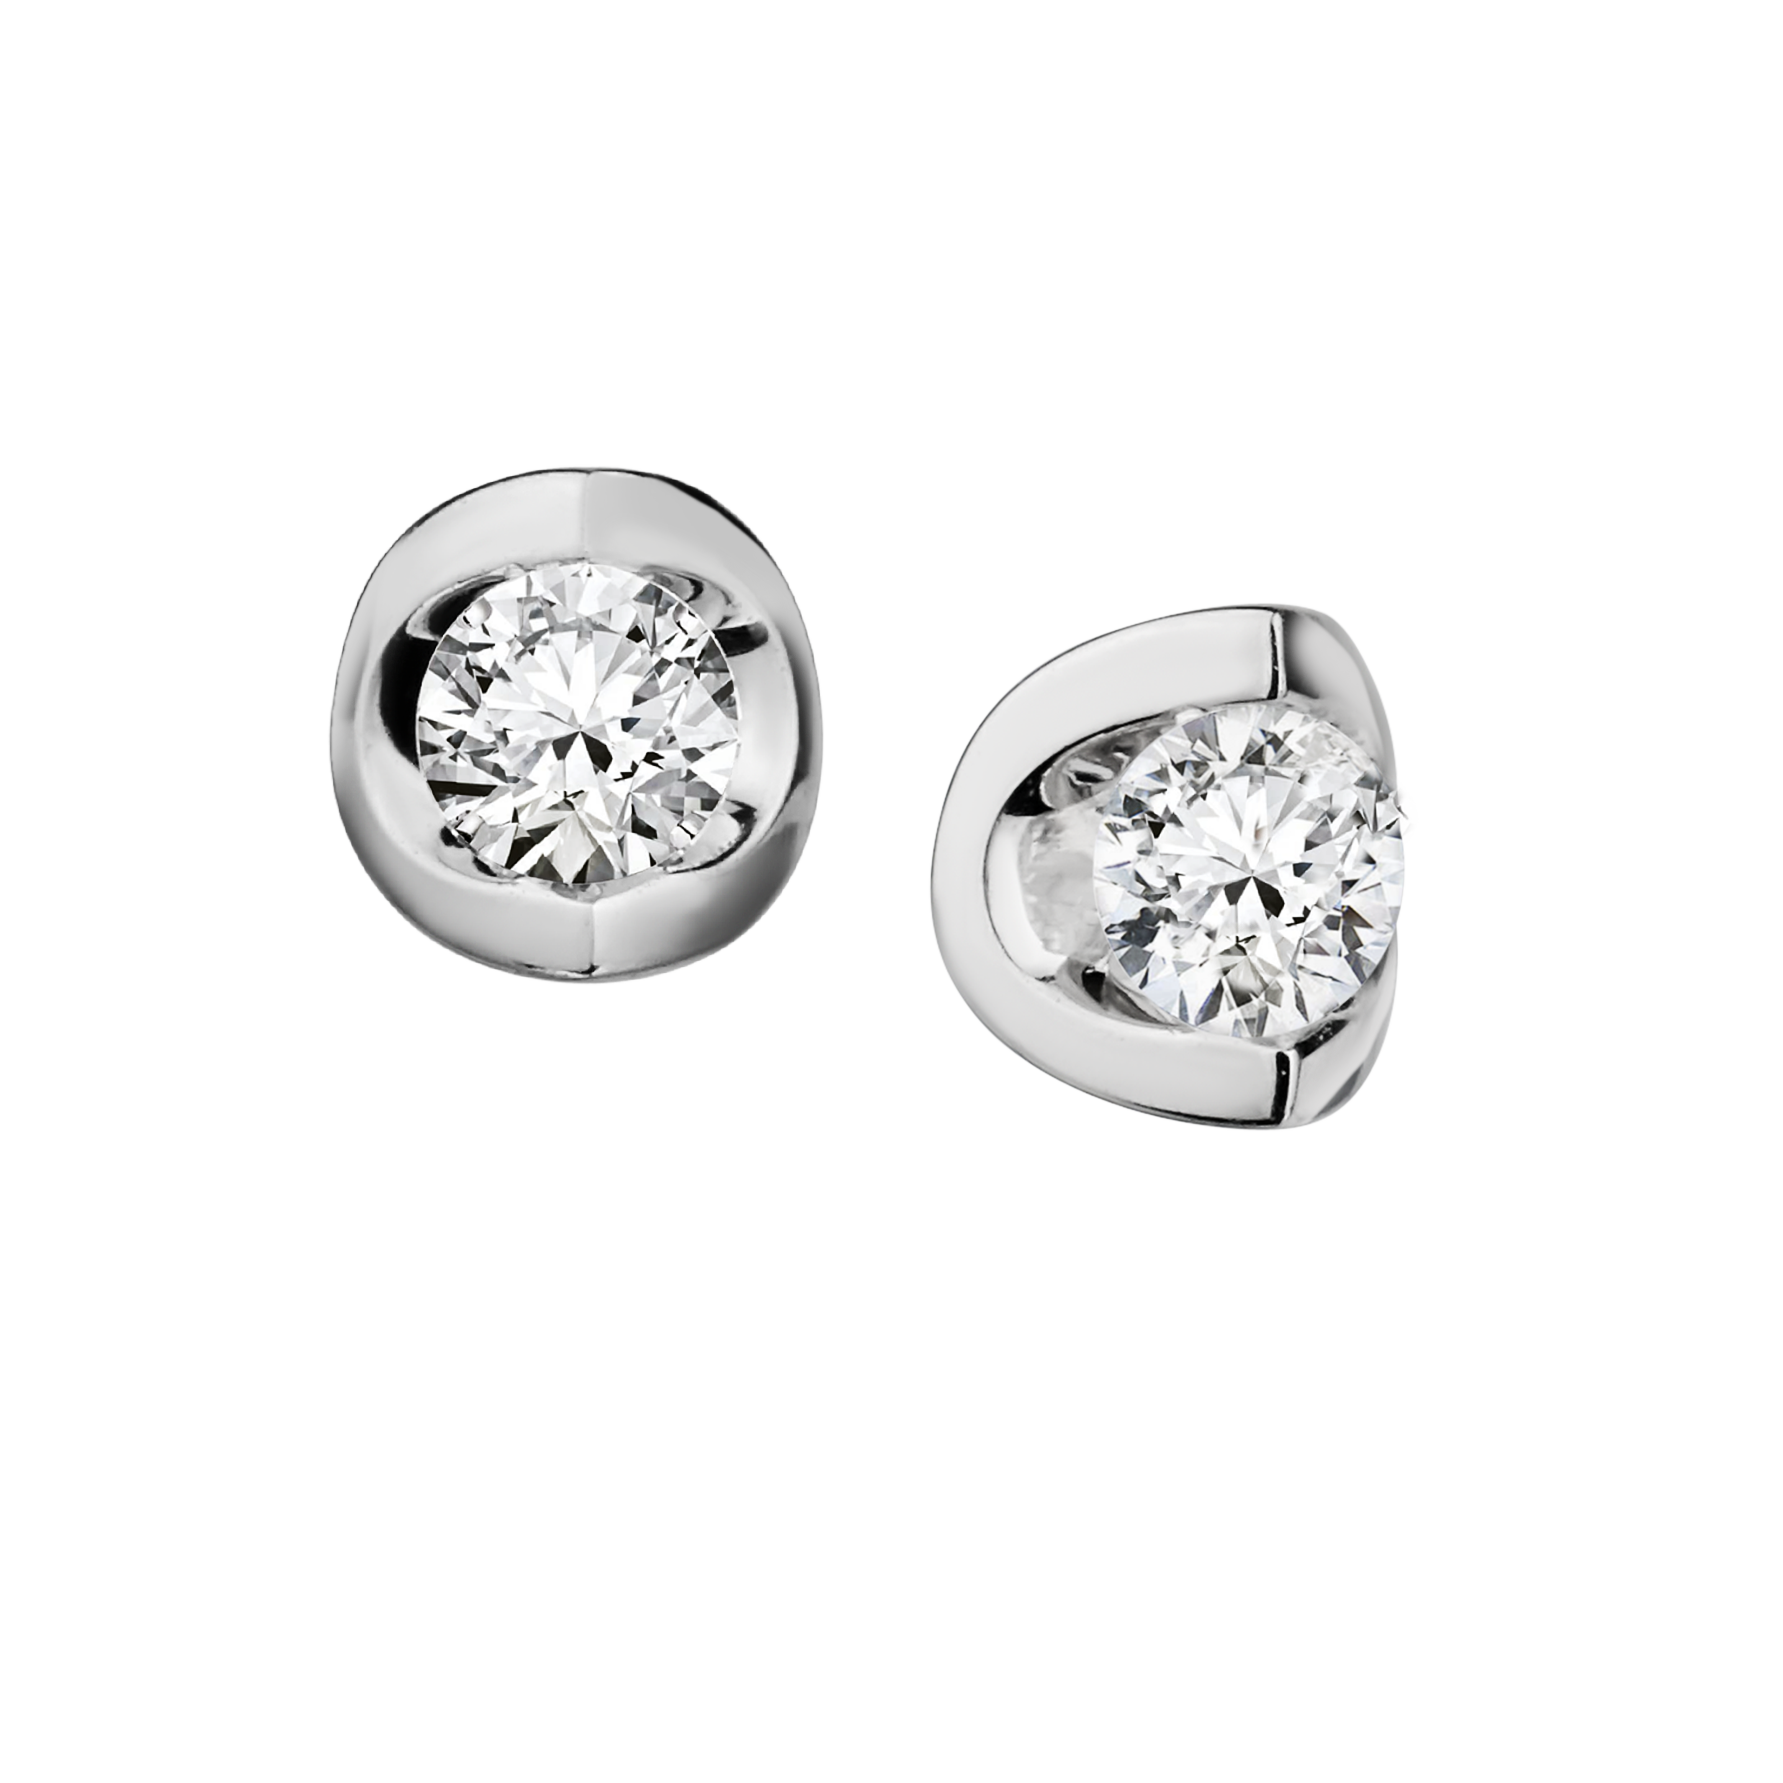 .10 Carat of Canadian Diamonds Tulip Stud Earrings, 10kt White Gold......................NOW